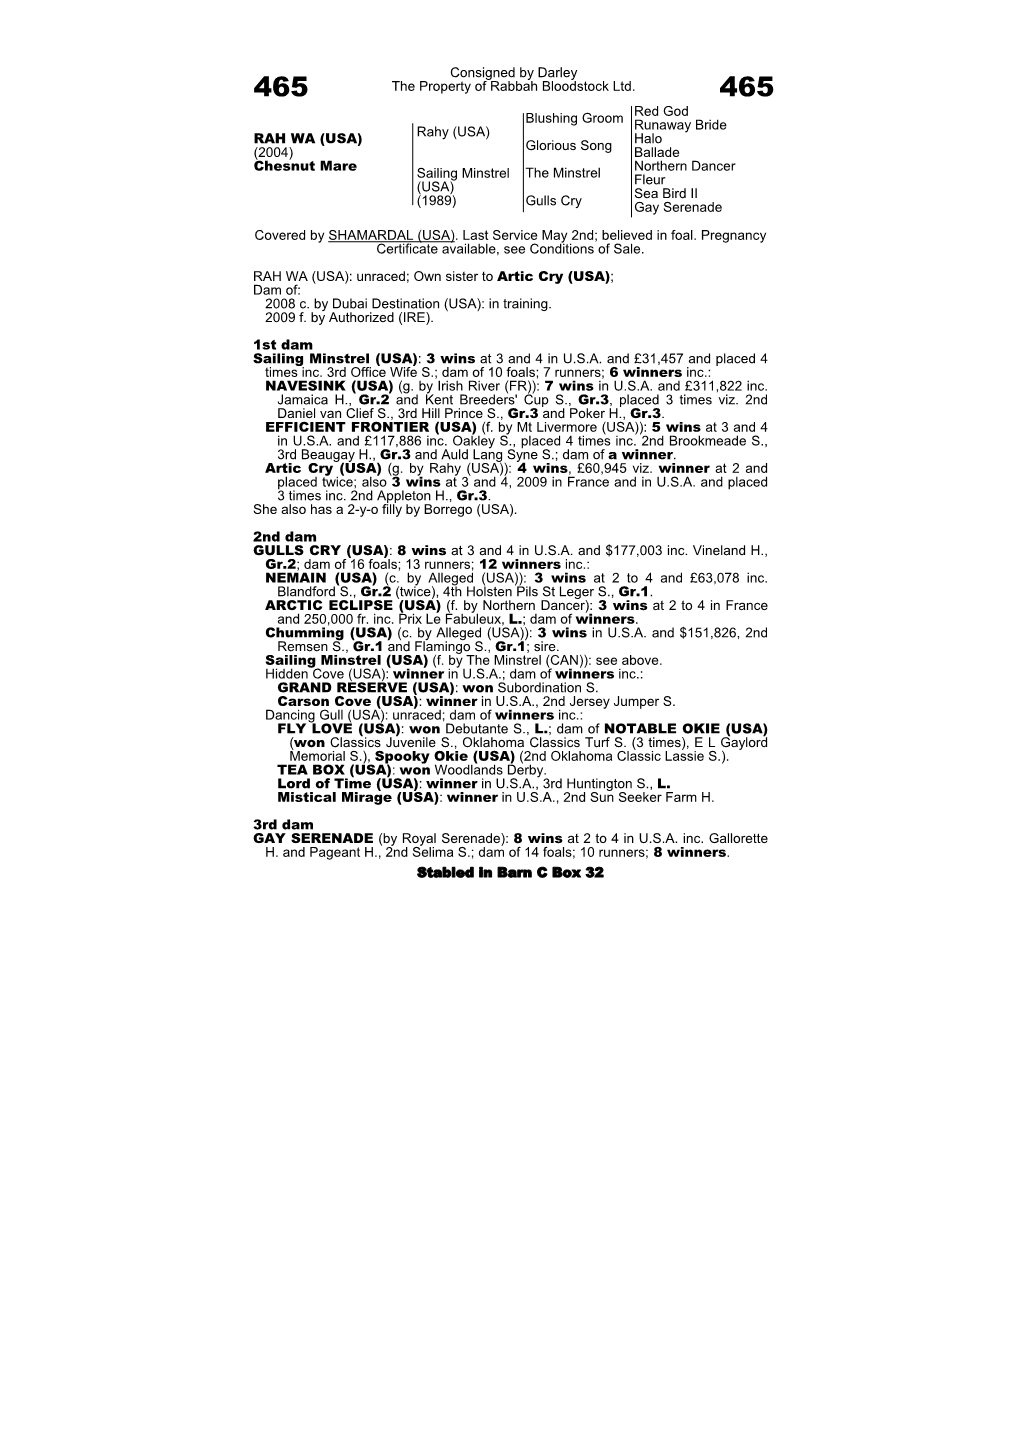 Consigned by Darley the Property of Rabbah Bloodstock Ltd. Blushing